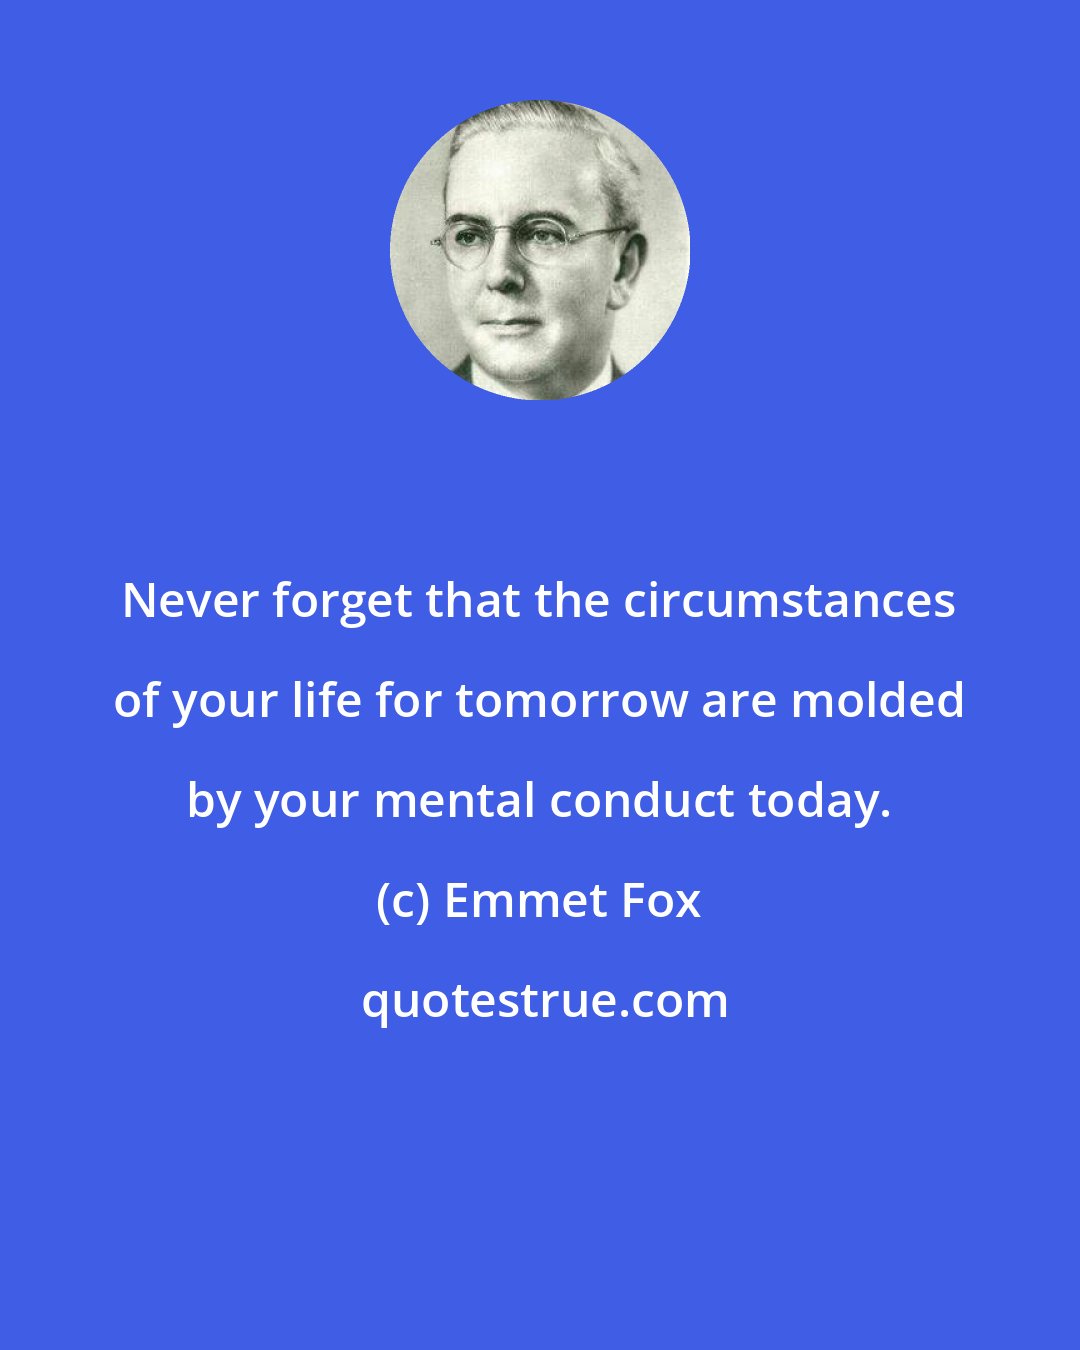 Emmet Fox: Never forget that the circumstances of your life for tomorrow are molded by your mental conduct today.